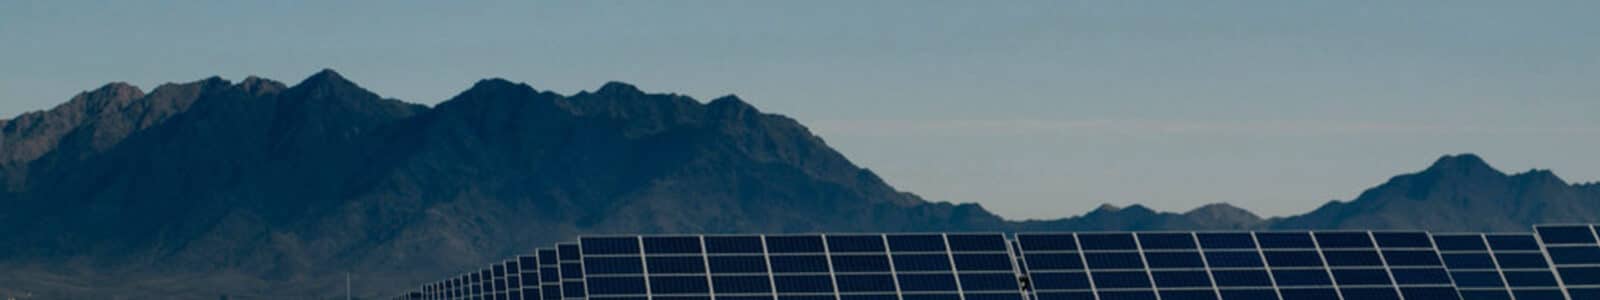 A field of solar panels in the desert with mountains in the background